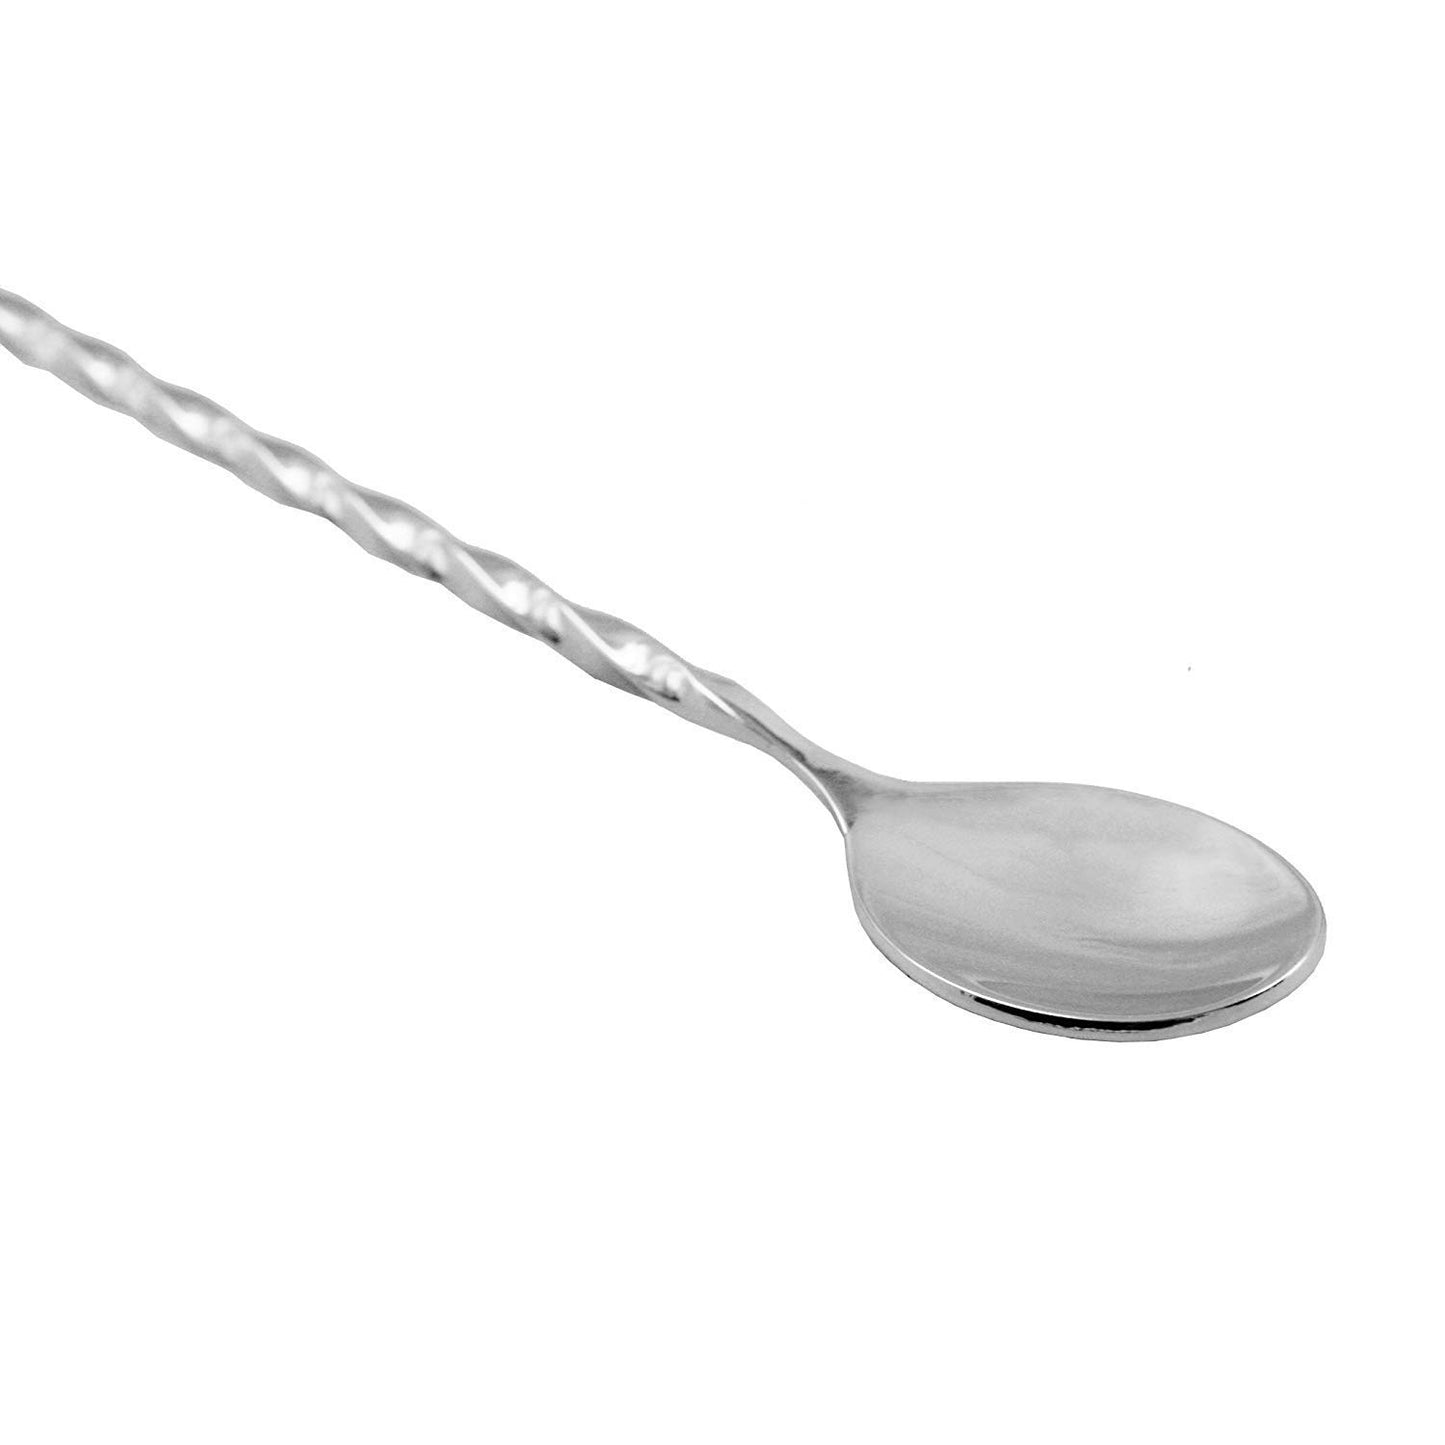 Rudra Exports Bar Spoon with Muddler top/Cocktail Mixing Spoon/Long Handle Stirring/Spiral Pattern, Bar Cocktail Shaker Spoon 28 cm: 2 Pcs